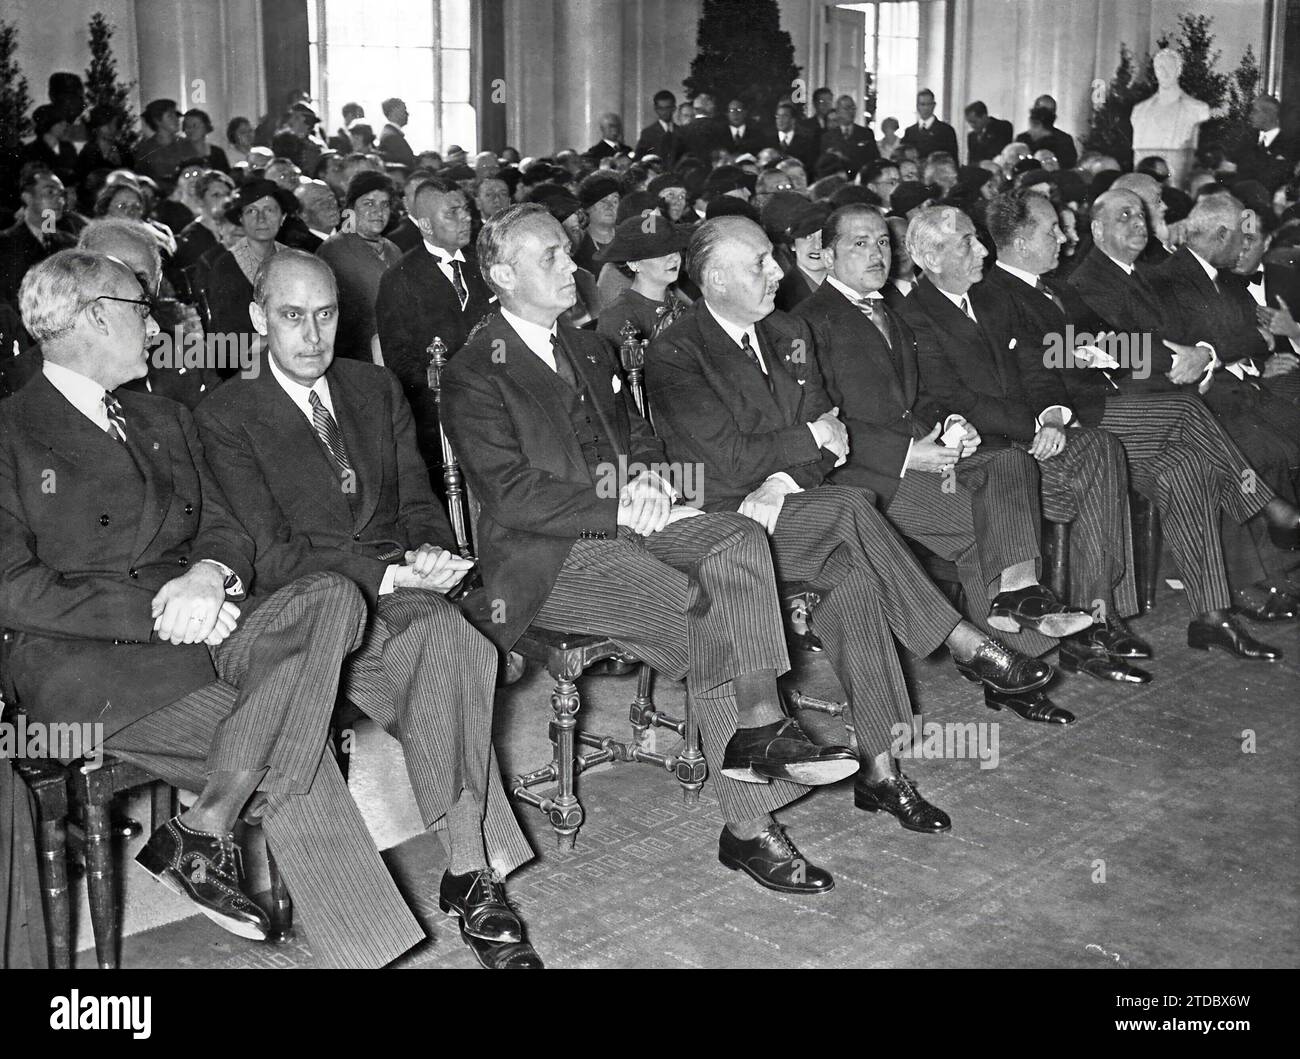 10/11/1935. A party was held in the hall of the Ibero-American Institute in Berlin to commemorate Columbus Day, attended by diplomatic and cultural representations of Spanish-speaking countries, many Spaniards and Americans residing in the German capital, and members of the German societies that aim to strengthen cultural and economic ties between Germany and Spanish America. Credit: Album / Archivo ABC / Ortiz Stock Photo